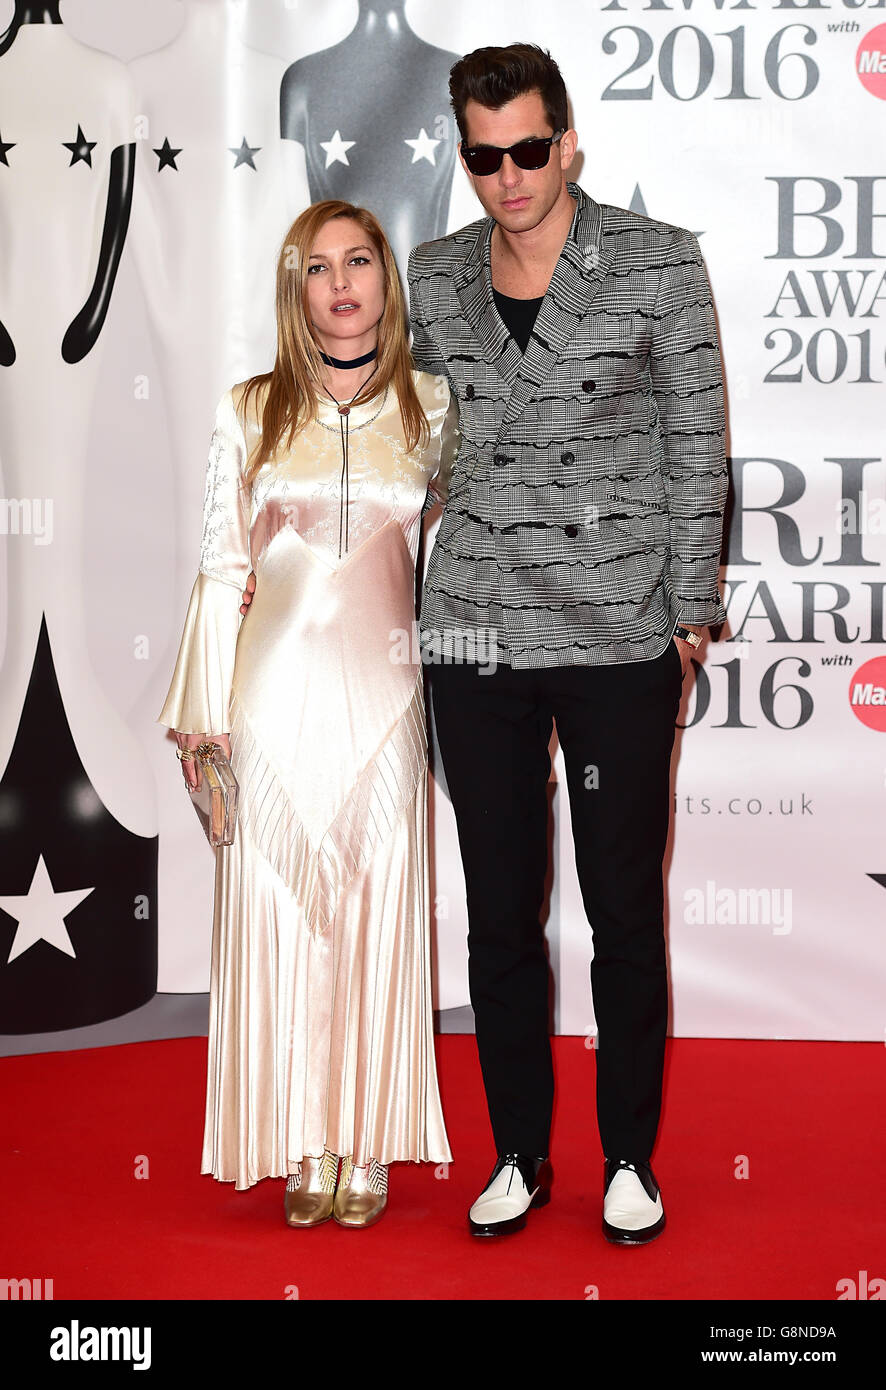 Mark Ronson and Josephine de La Baume arriving for the 2016 Brit Awards at the O2 Arena, London. PRESS ASSOCIATION Photo. Picture date: Wednesday February 24, 2016. See PA story SHOWBIZ Brits. Photo credit should read: Ian West/PA Wire Stock Photo